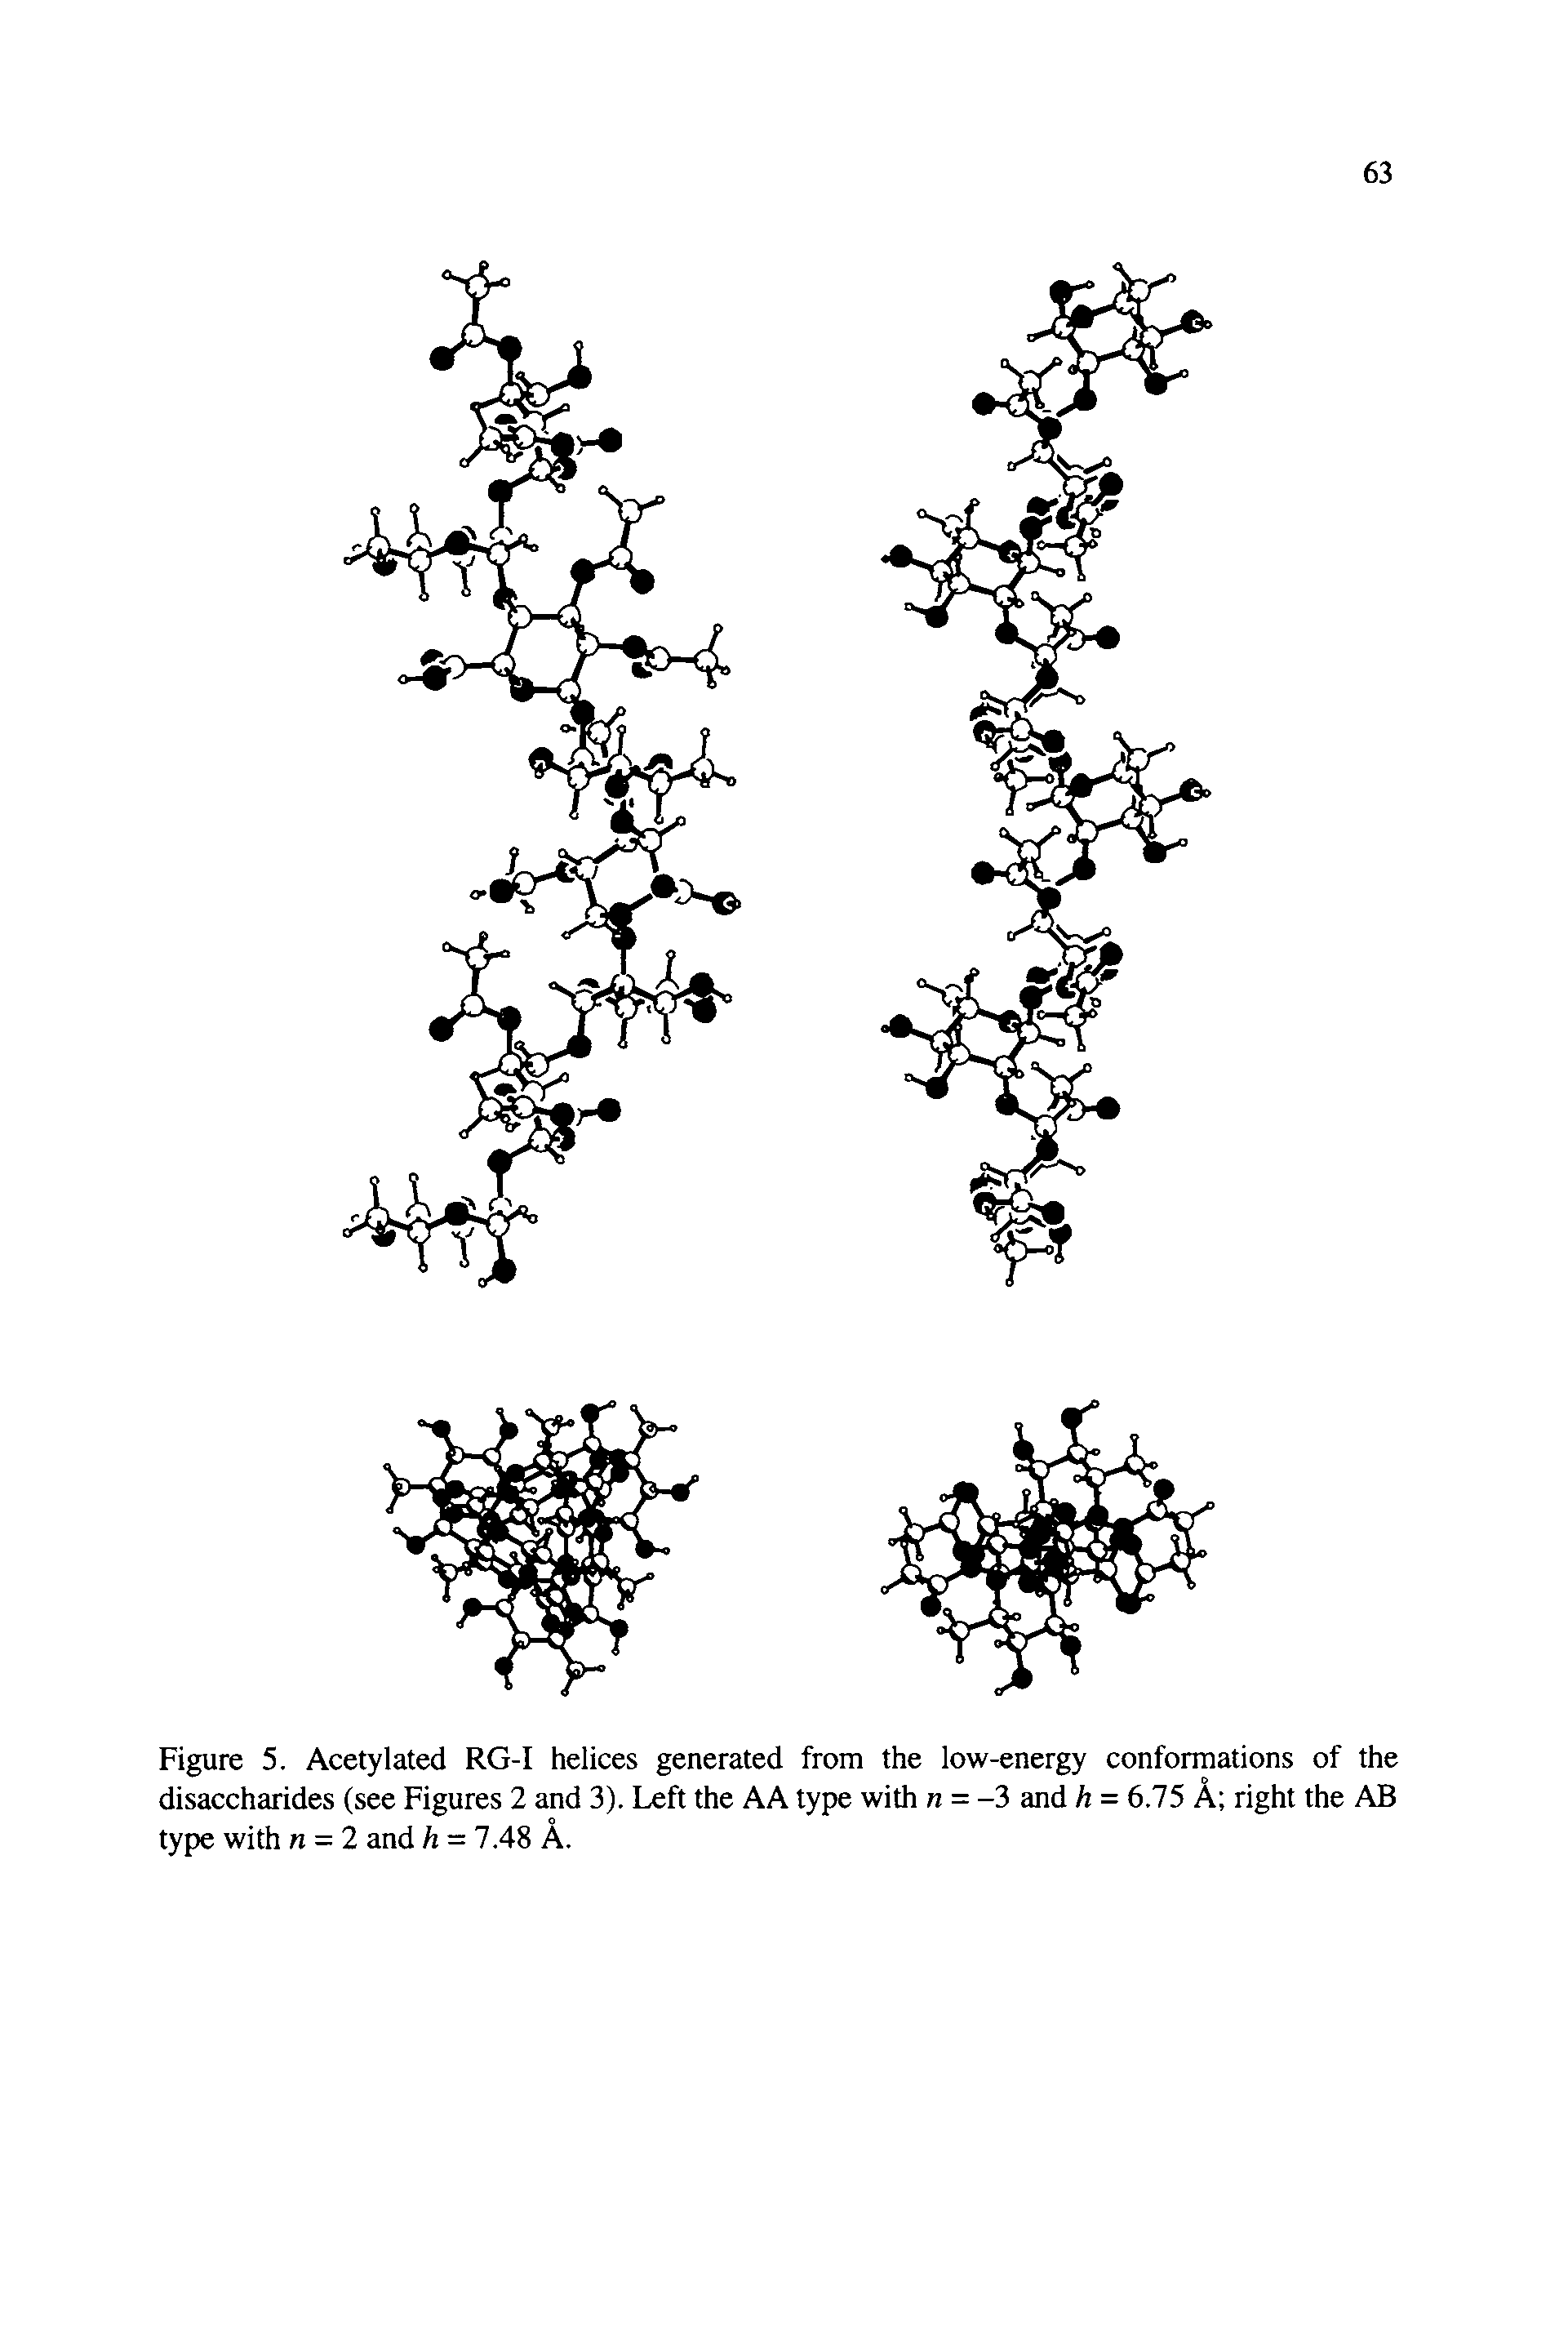 Figure 5. Acetylated RG-I helices generated from the low-energy conformations of the disaccharides (see Figures 2 and 3). Left the AA type with n = -3 and h = 6.75 A right the AB type with n = 2 and h = 7.48 A.